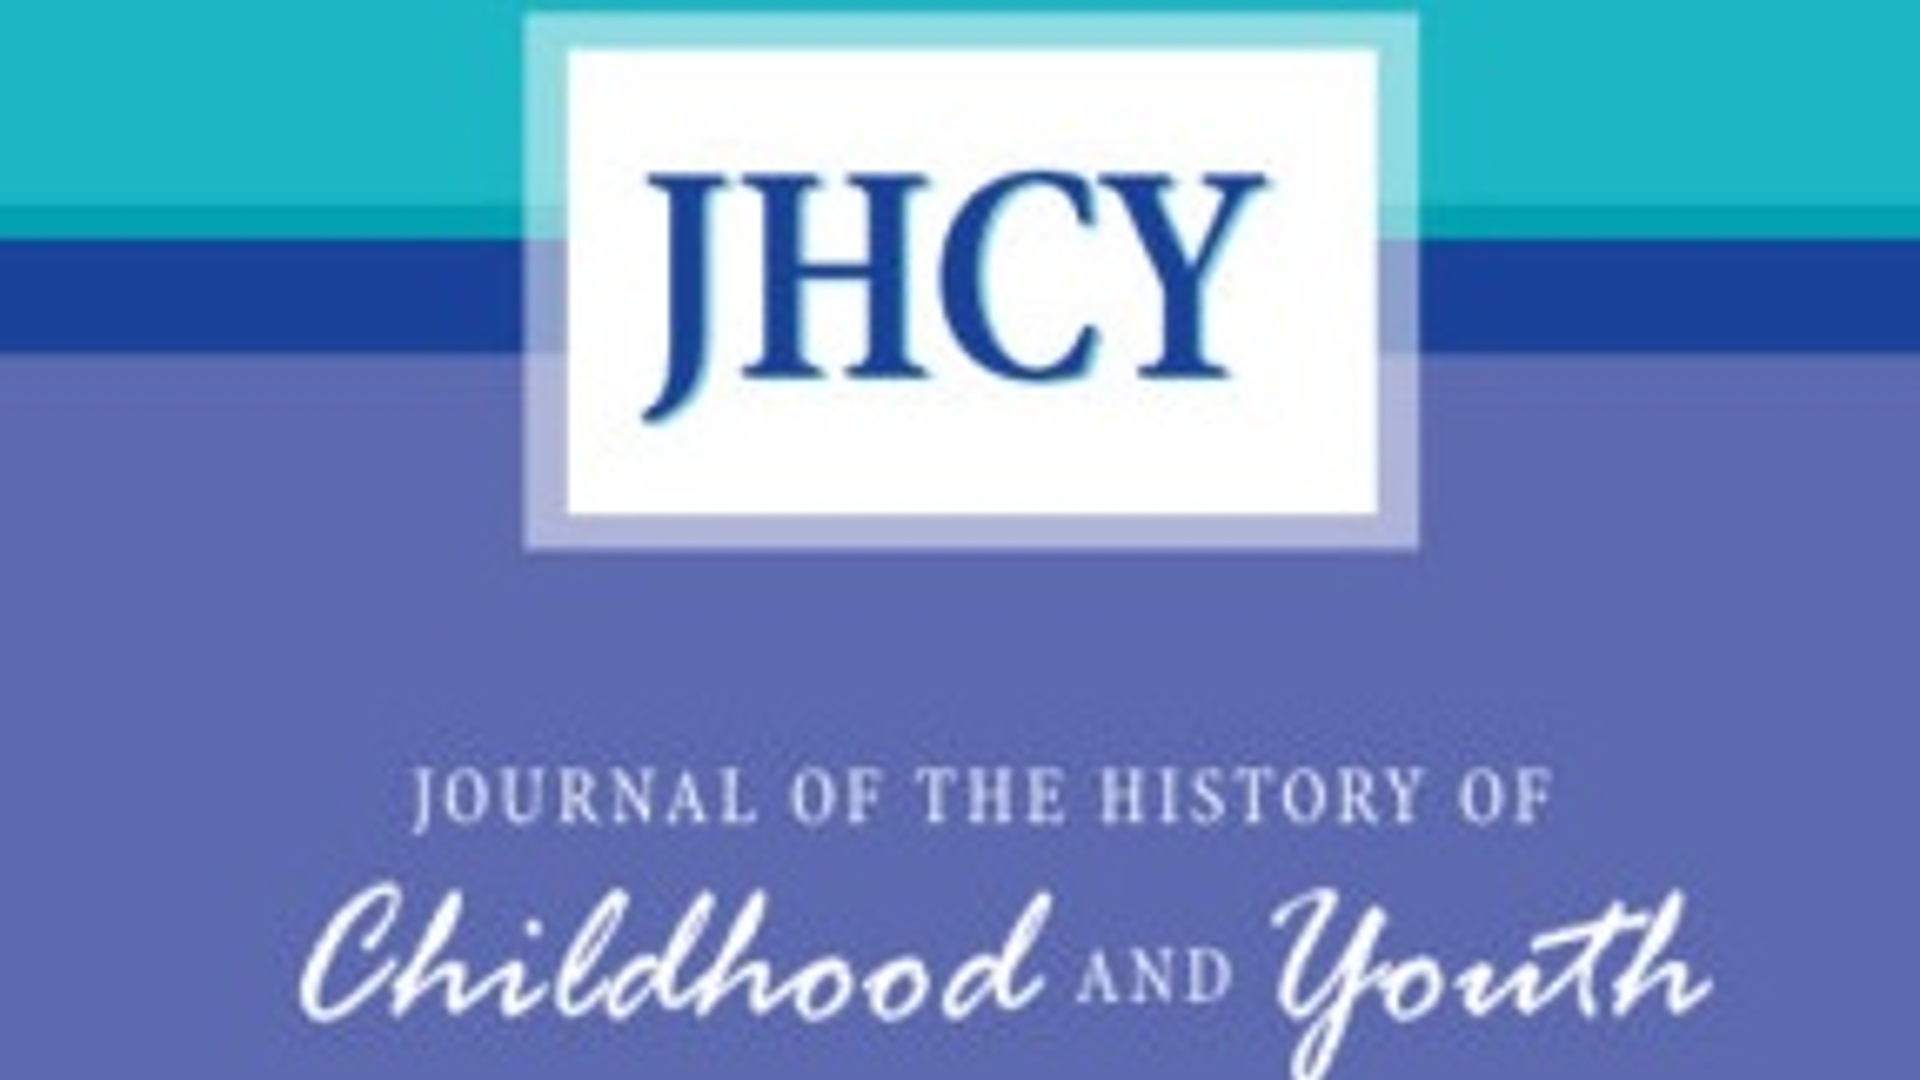 Call for Applications: JHCY Editorship